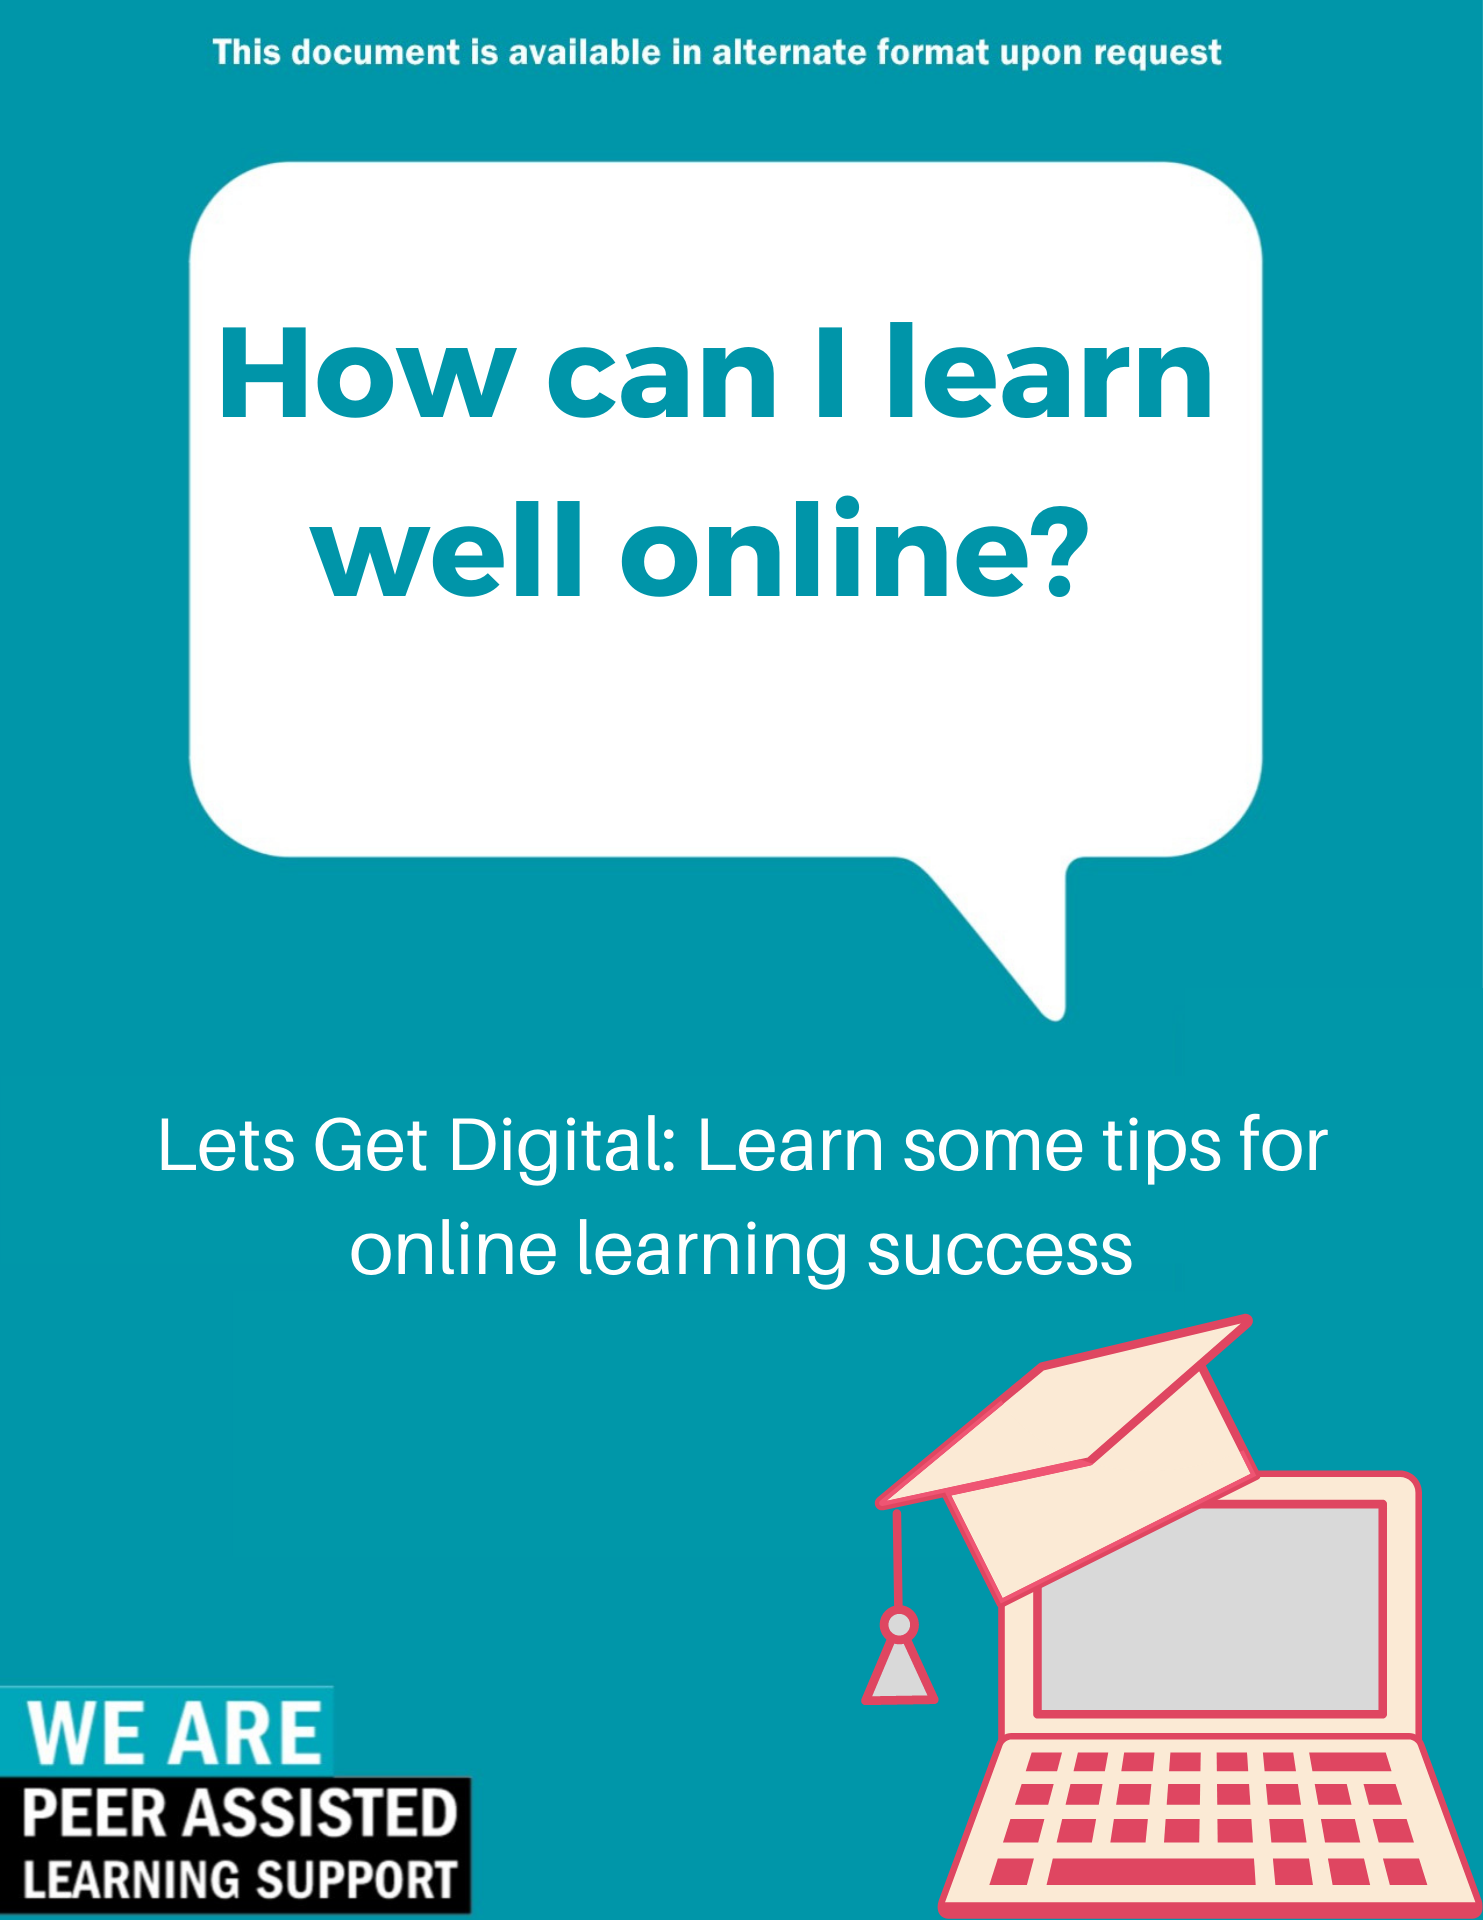 n image of a laptop with a graduation cap on it on a bright blue background. Background text says “How can I learn well online? 